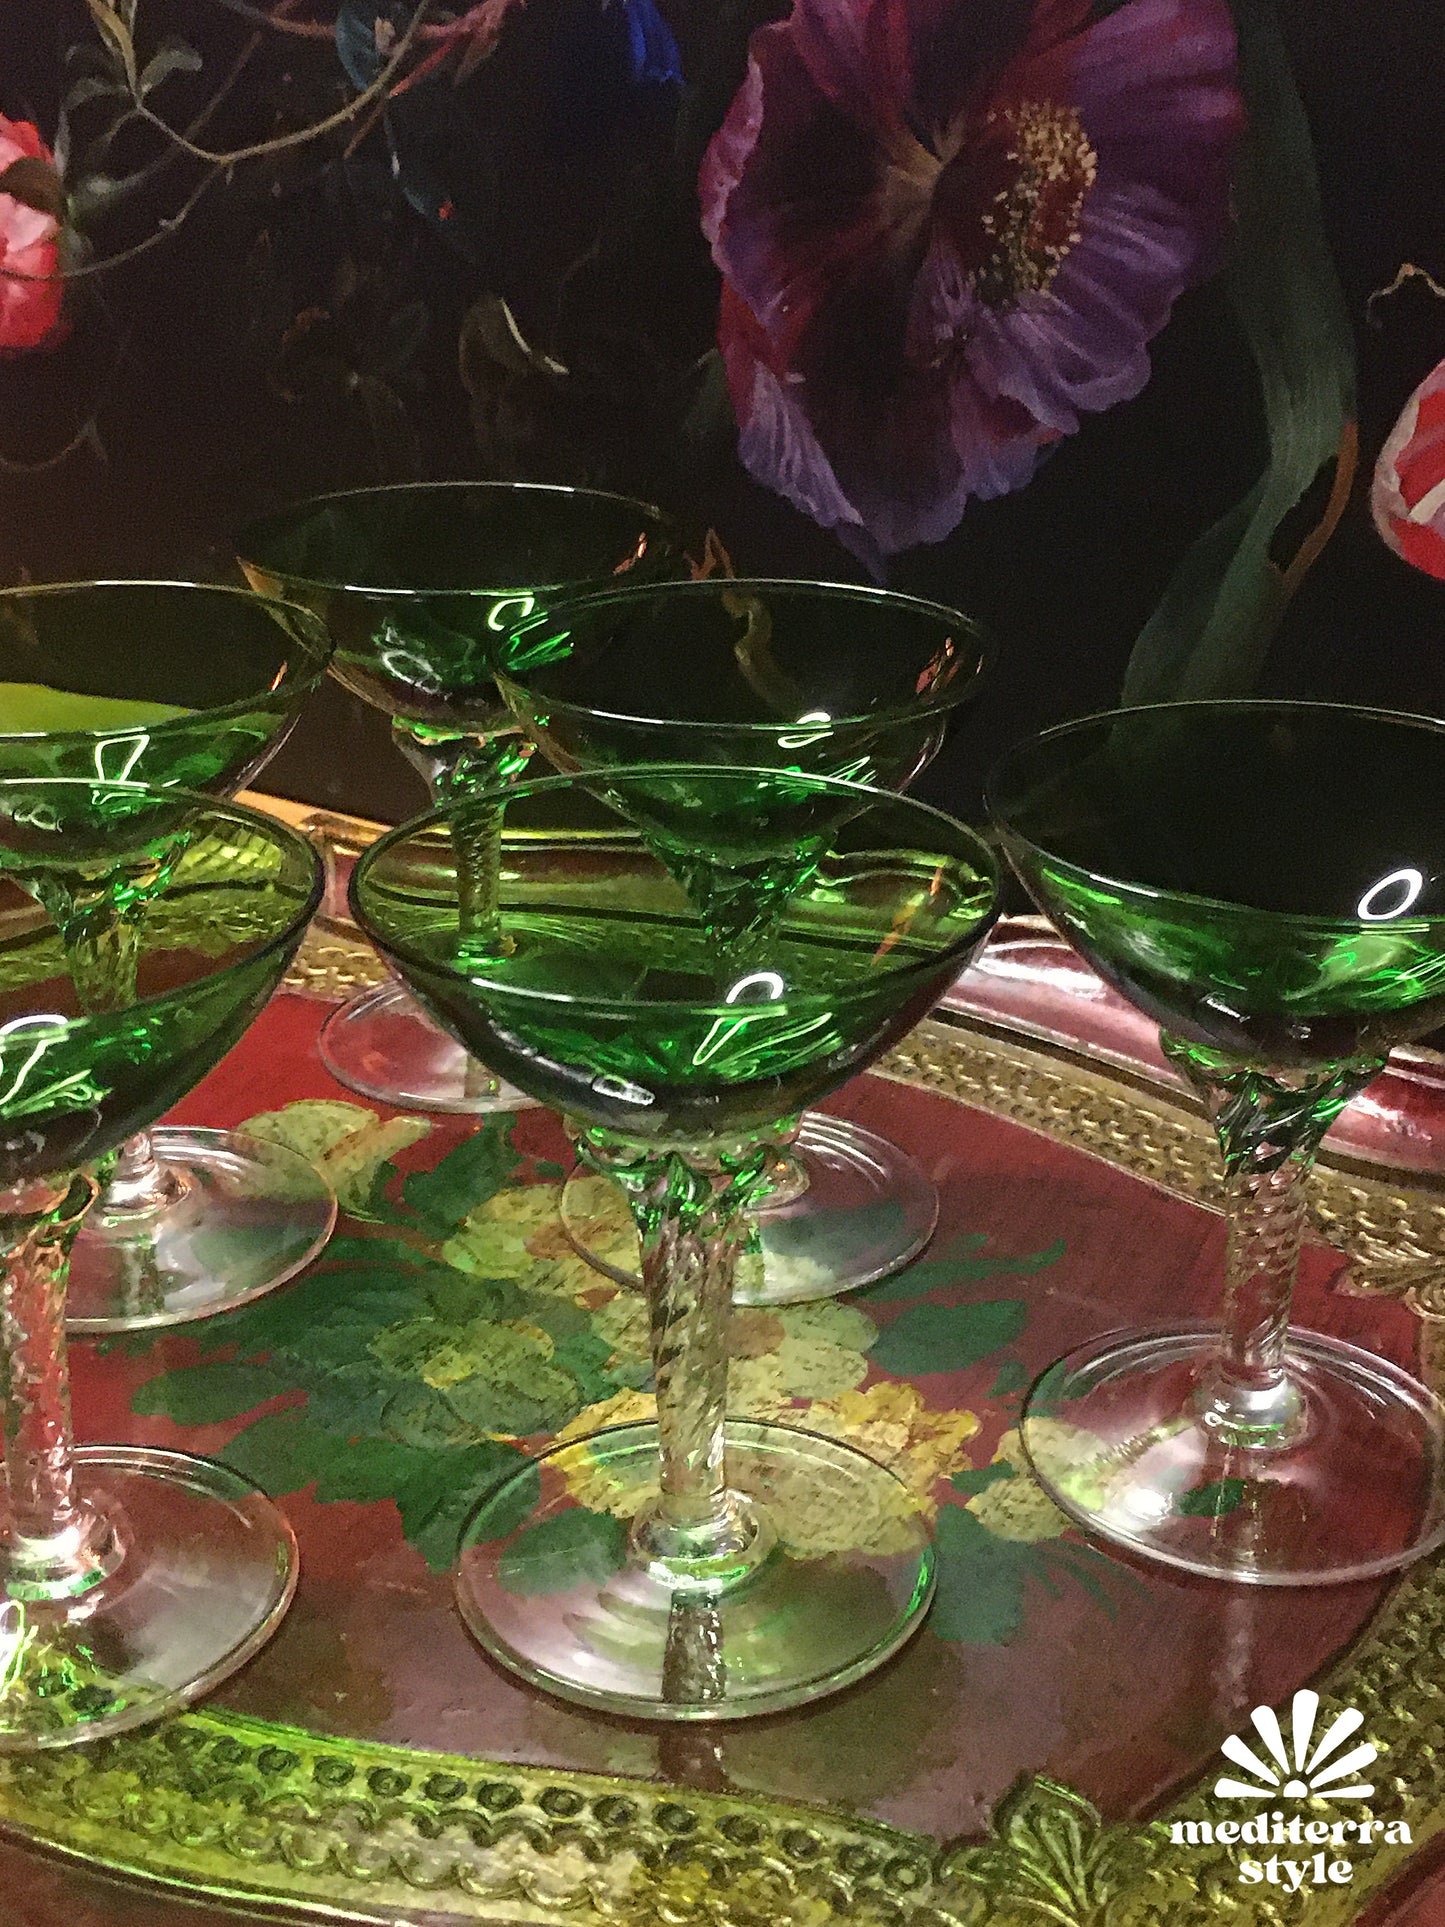 Set of 6 vintage green liquor glasses from France or Italy, 1970s